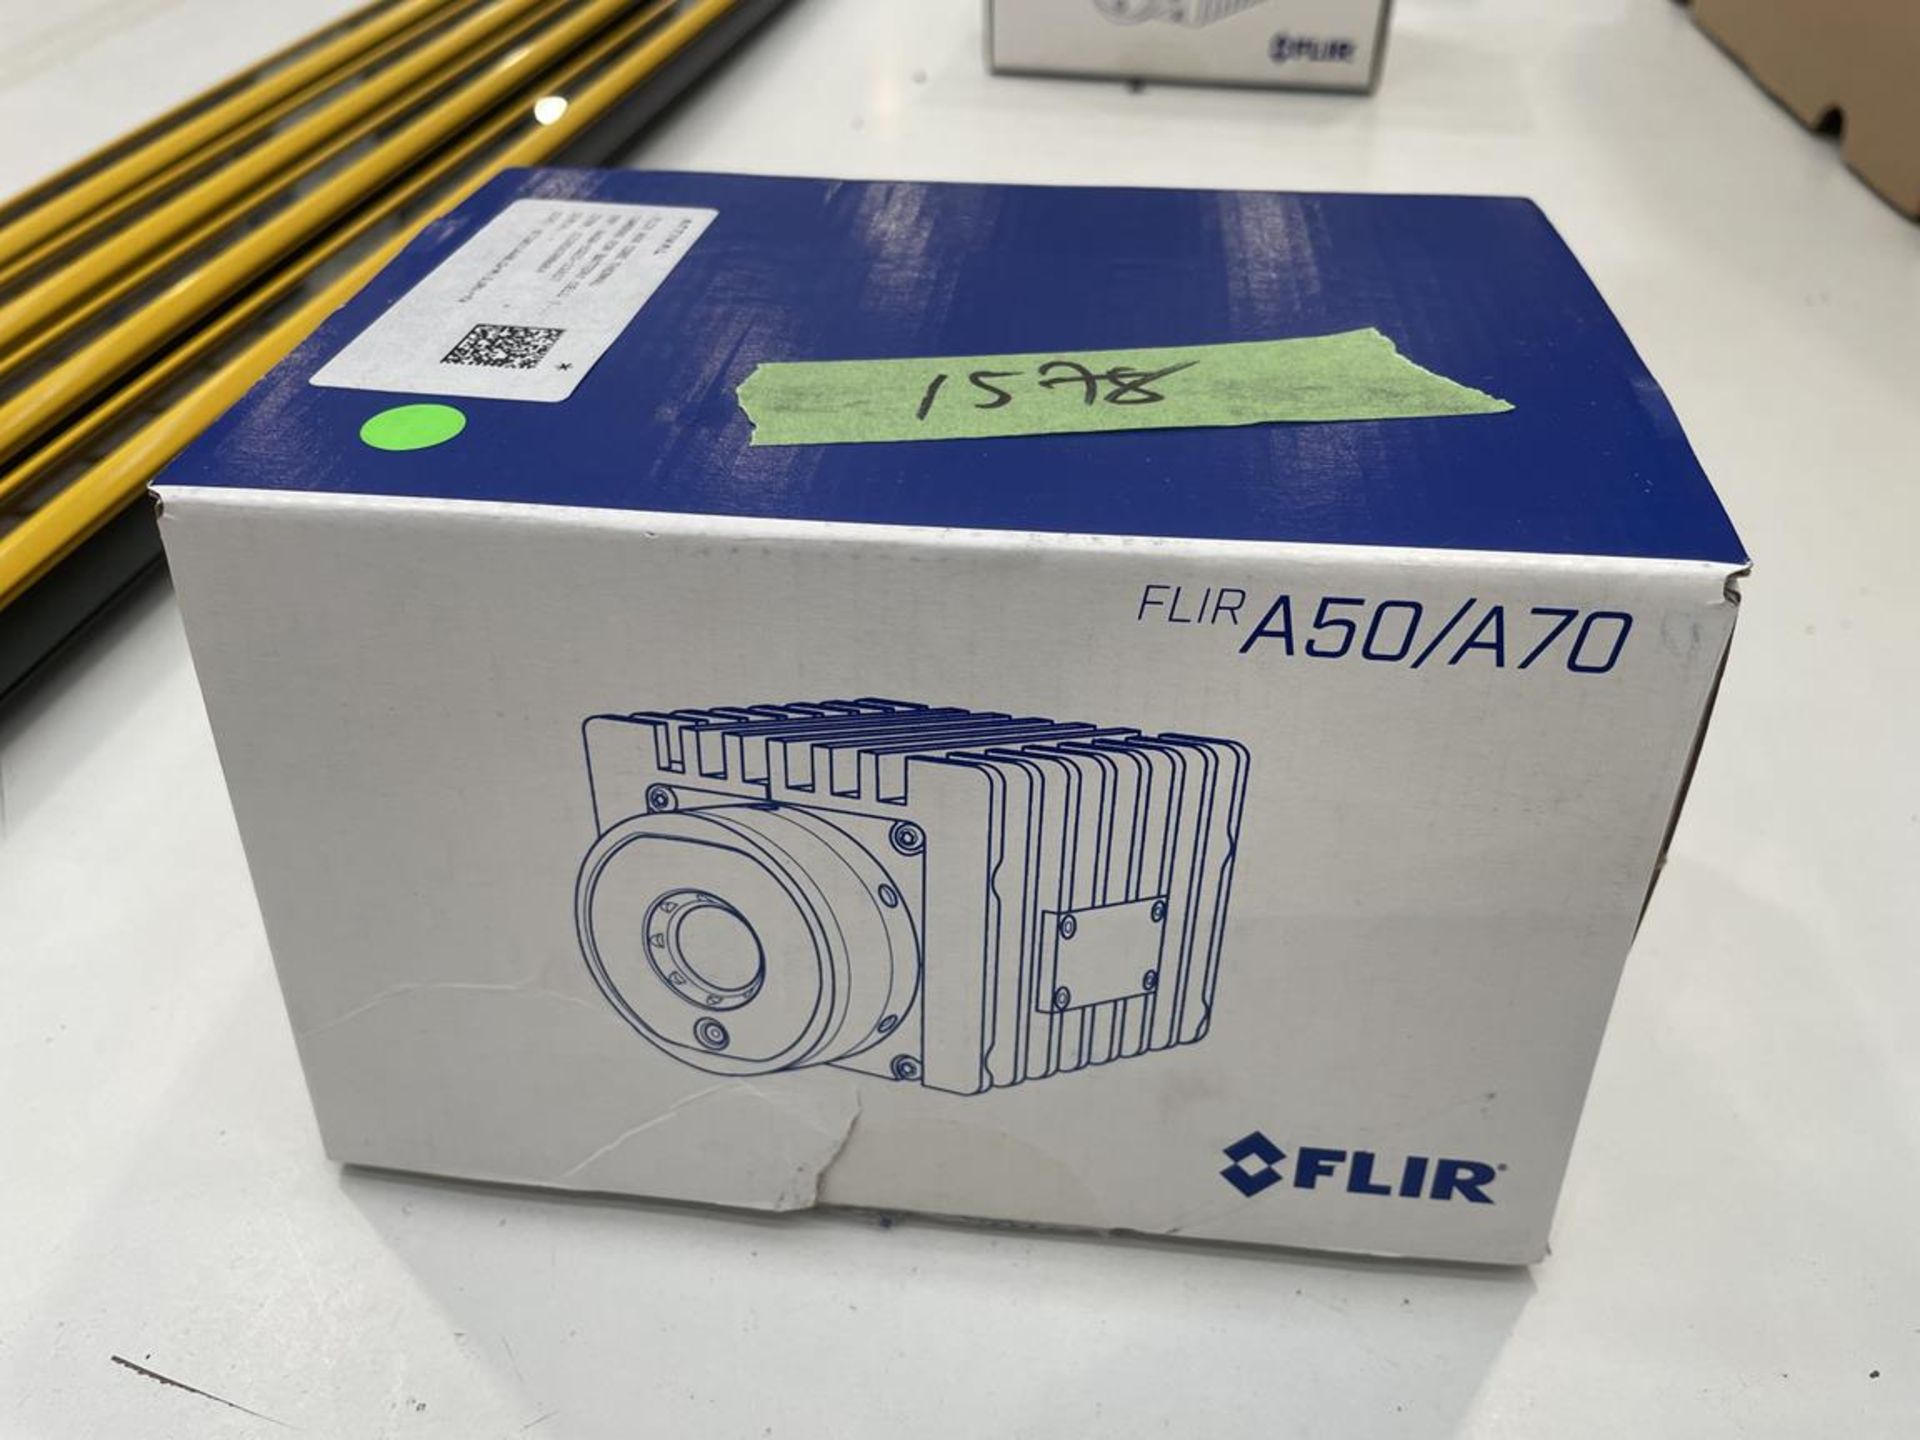 Flir, A50 thermal camera (boxed and unused), Serial No. 89800871